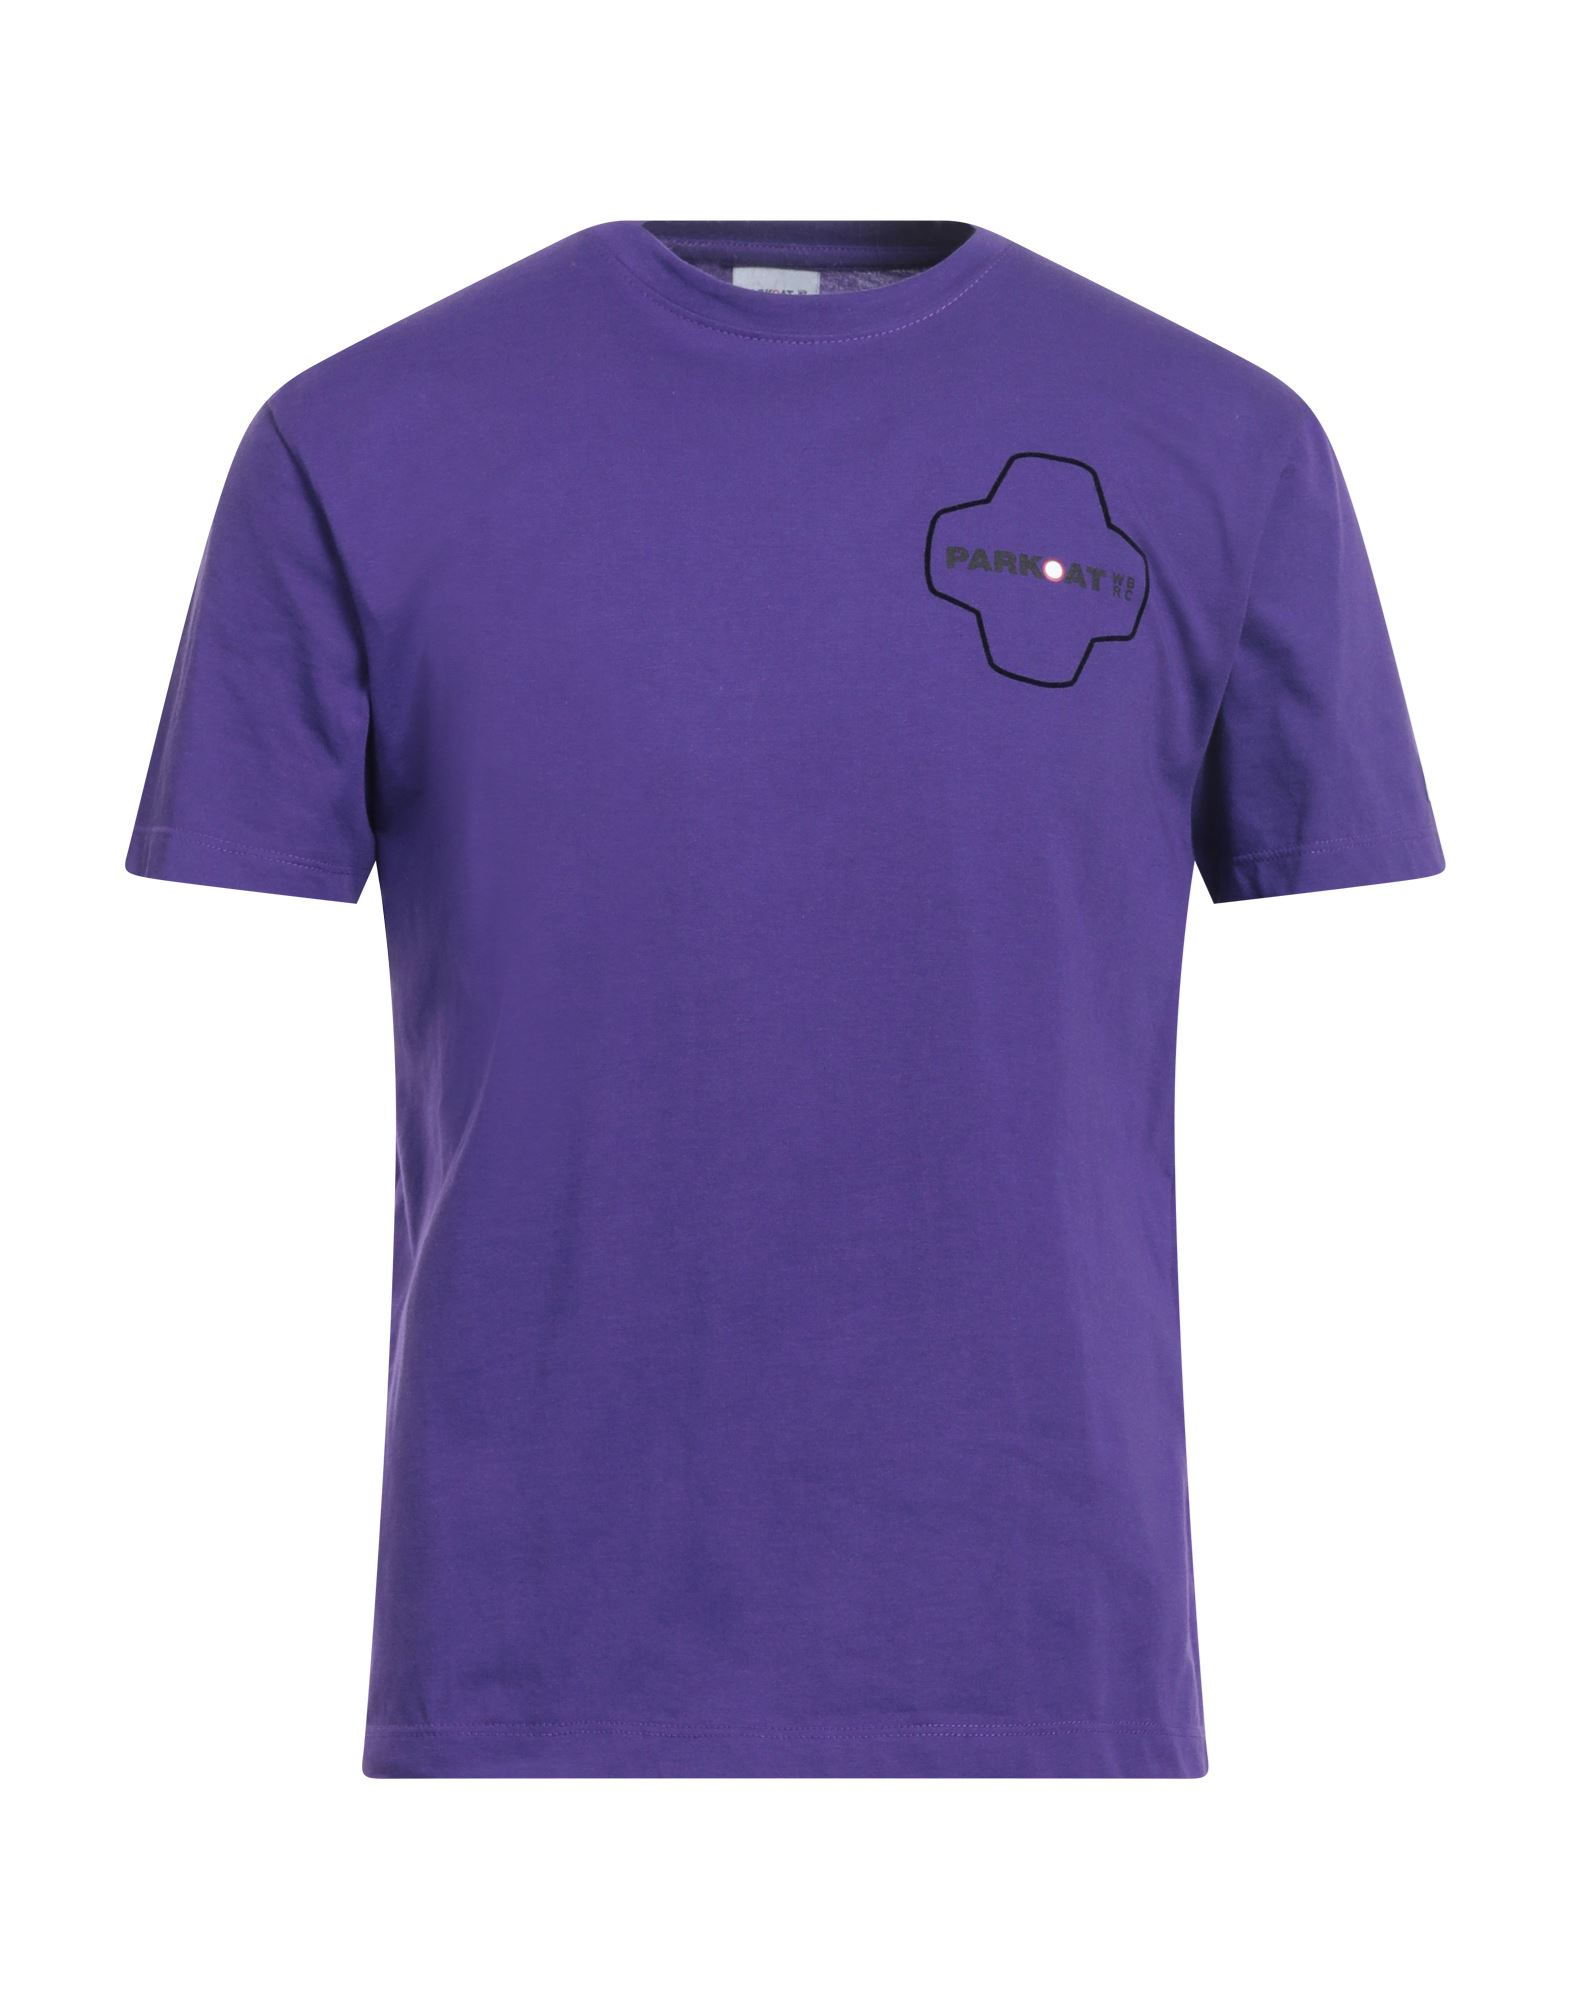 Parkoat T-shirts In Purple